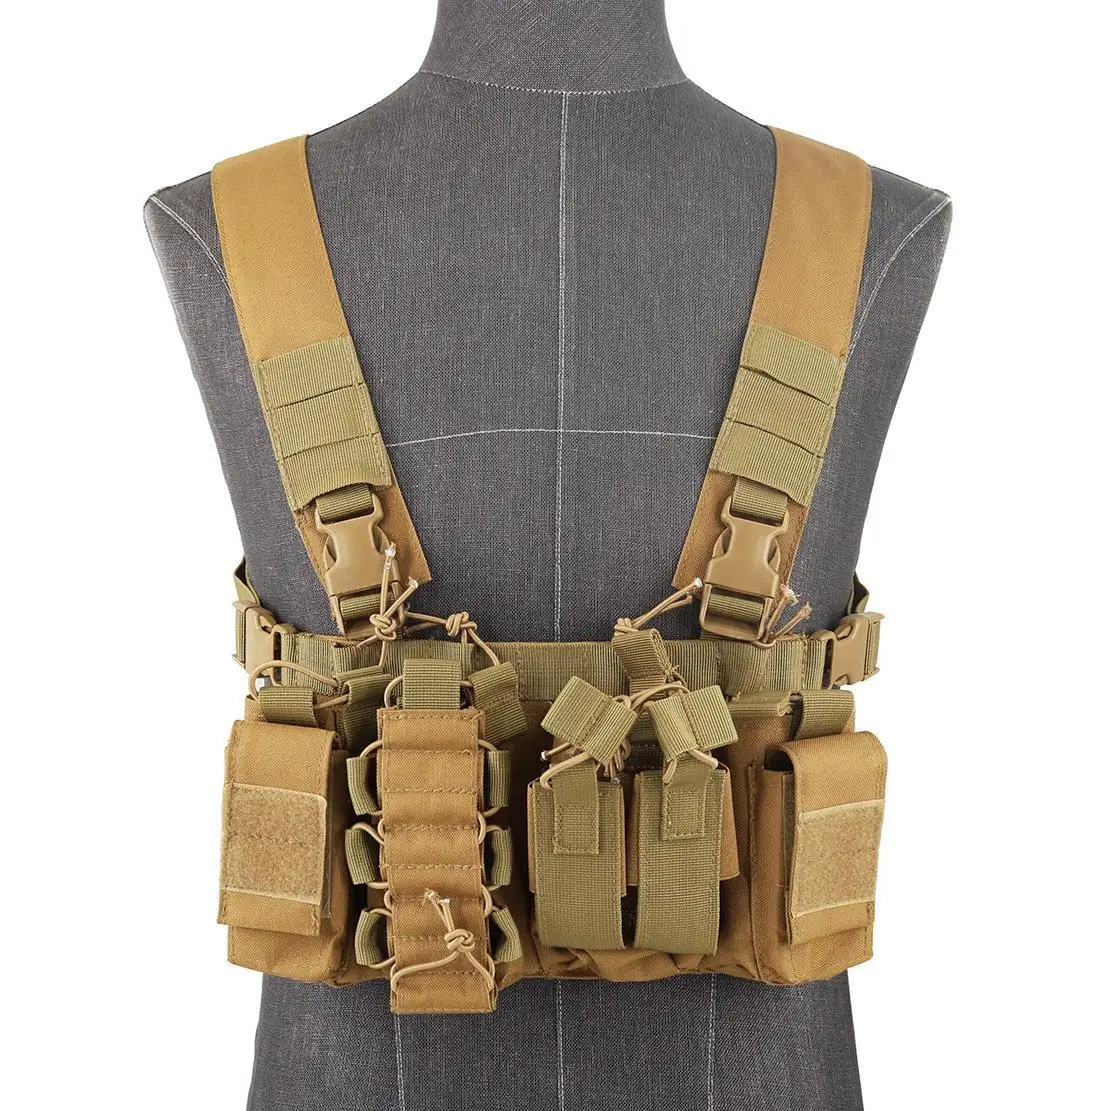 

Mens Adjustable Molle Outdoor Camouflage Combat New Style Magazine Pouches Survival Tactical Chest Rig Vest